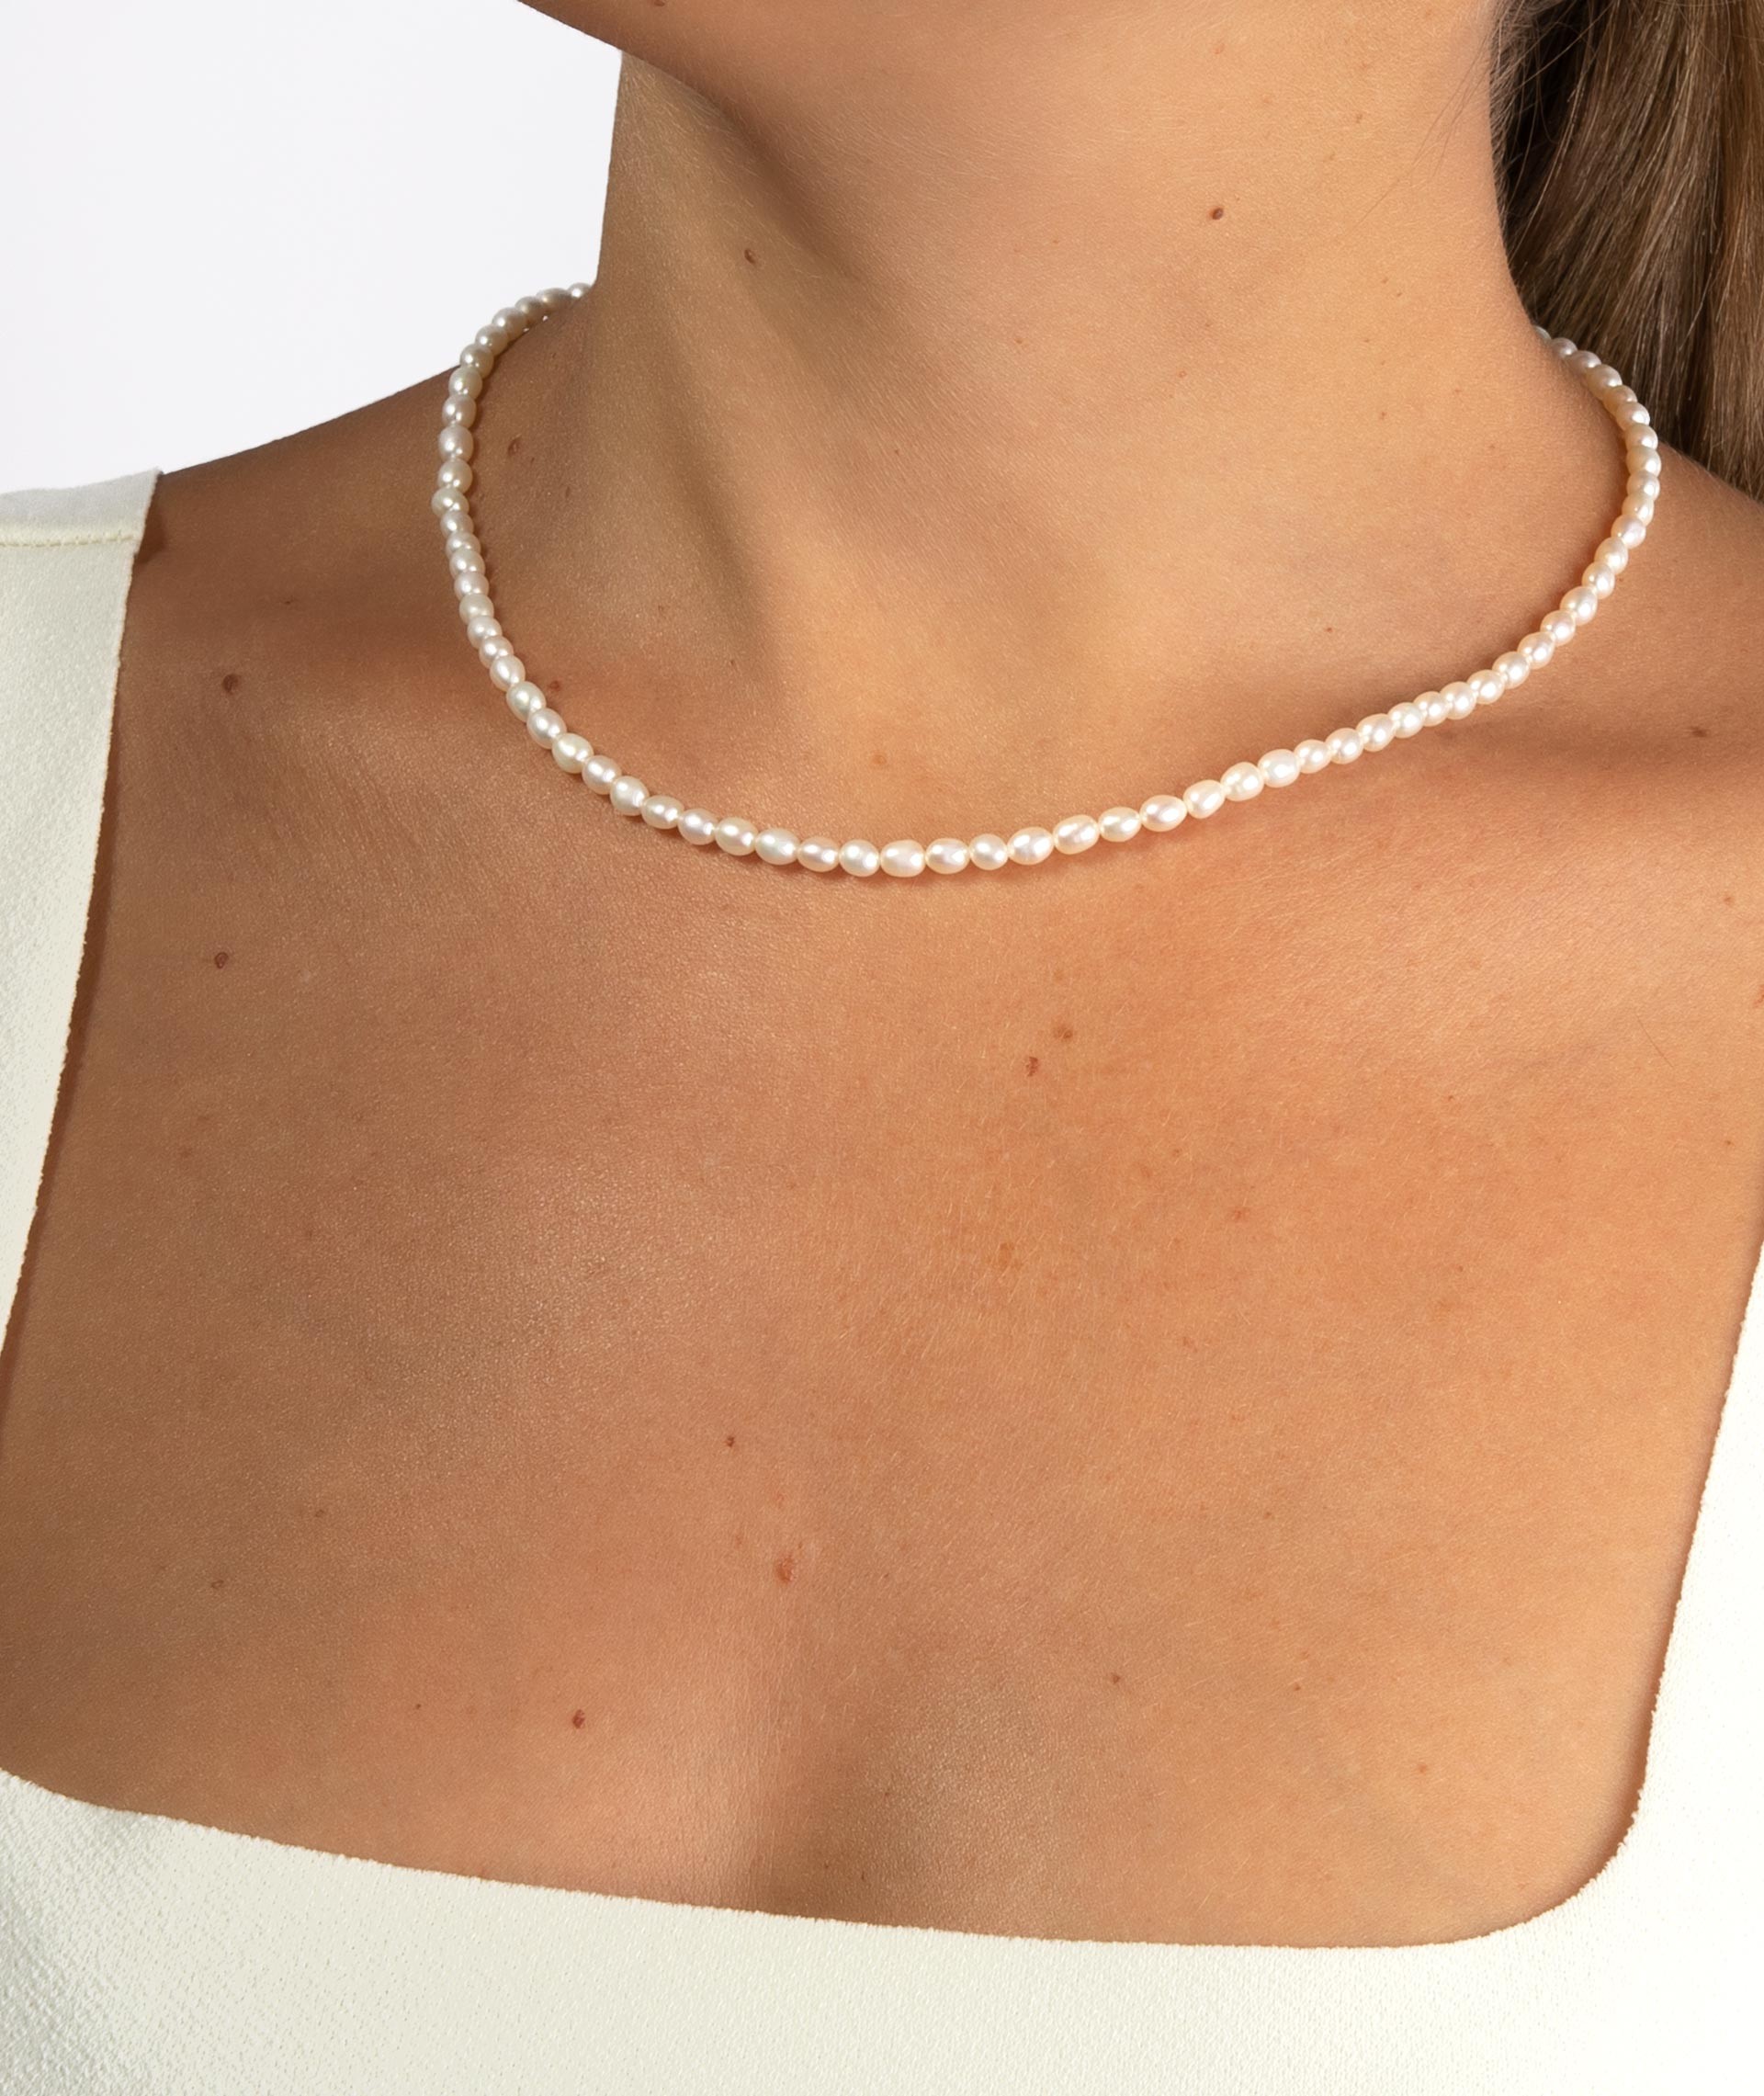 Necklace pearls 4mm